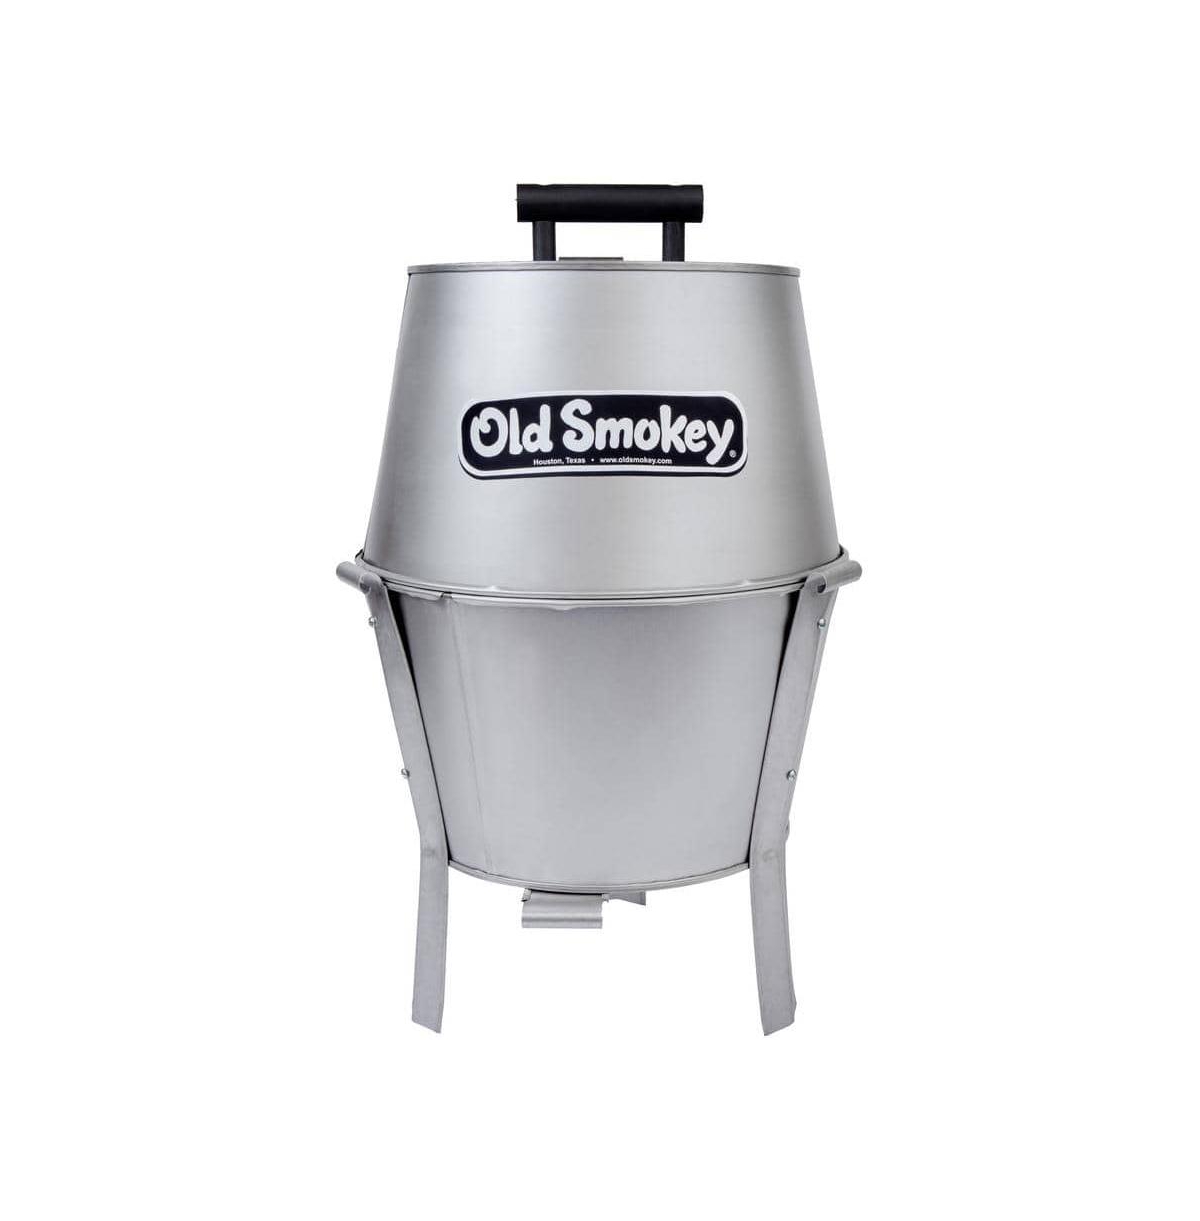 UPC 016063001403 product image for Old Smokey Charcoal Grill 14 Grill Small | upcitemdb.com